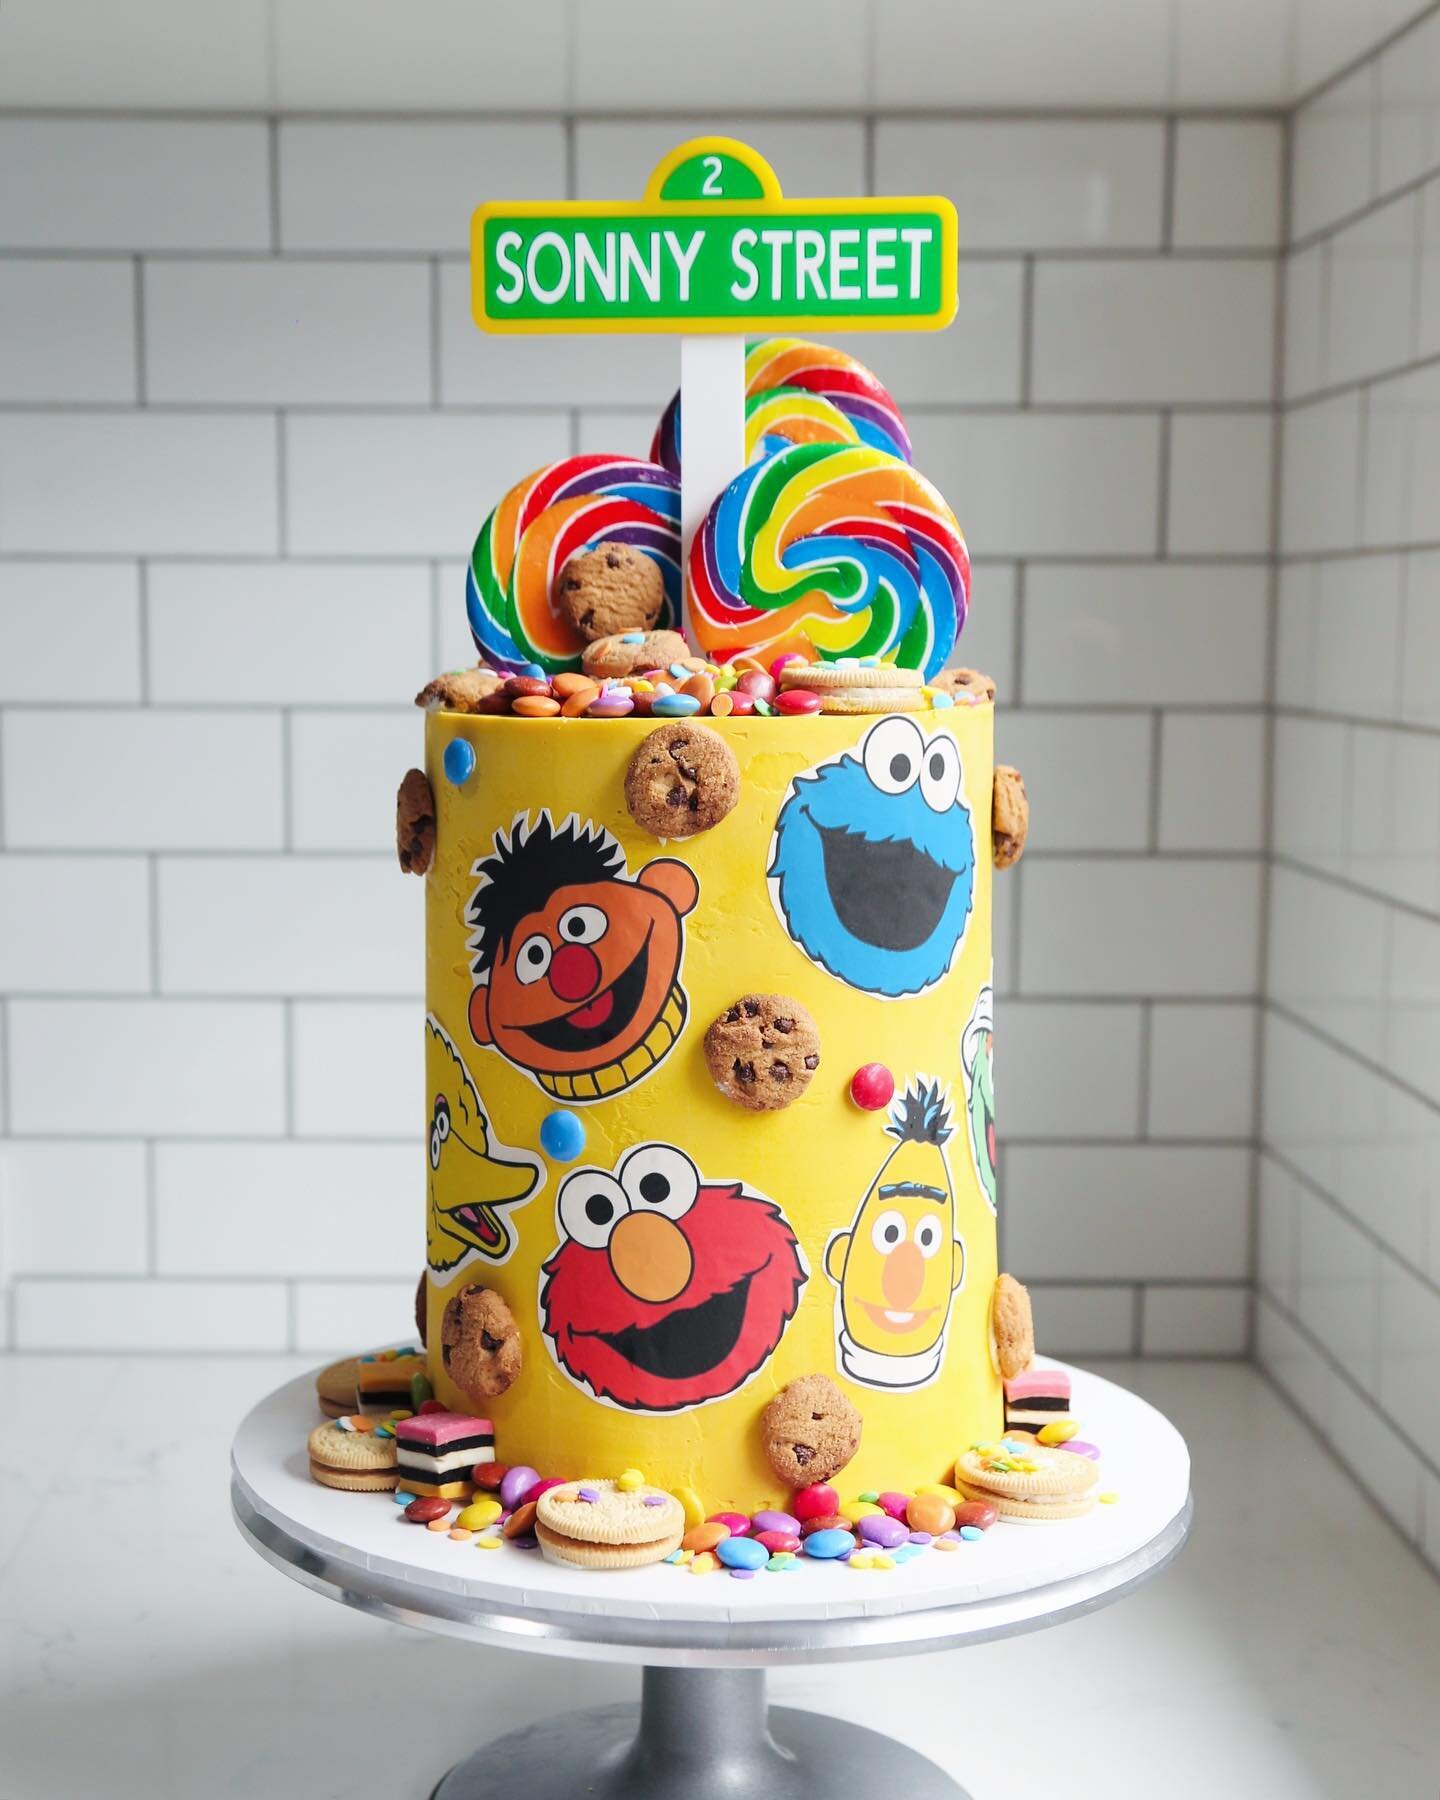 Hello from New York City!🗽🍎 this was the last cake I made before hanging up the apron and taking a break in the US of A. Thought I&rsquo;d share this cake today as Xav and I will be visiting Sesame Street HQ right here on Broadway 🥰 super grateful